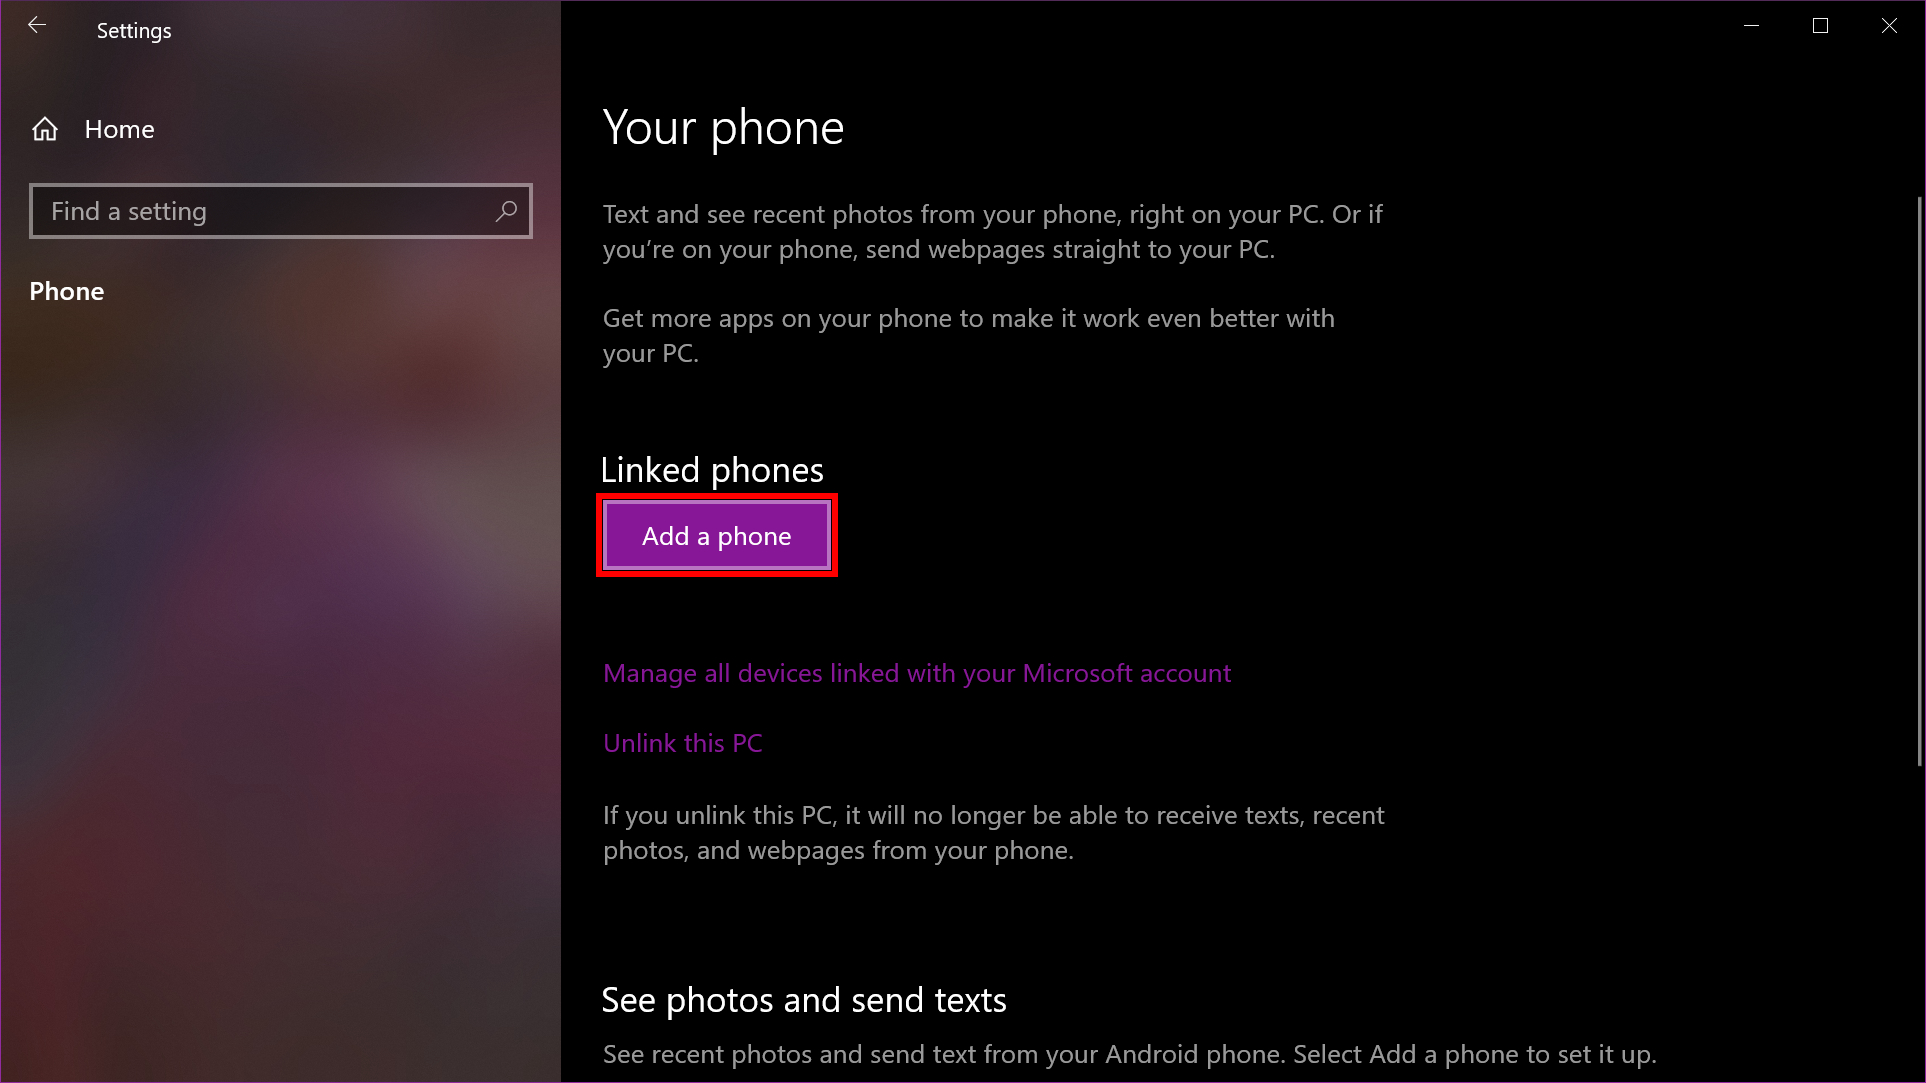 Windows 10 Add a Phone for sms messaging